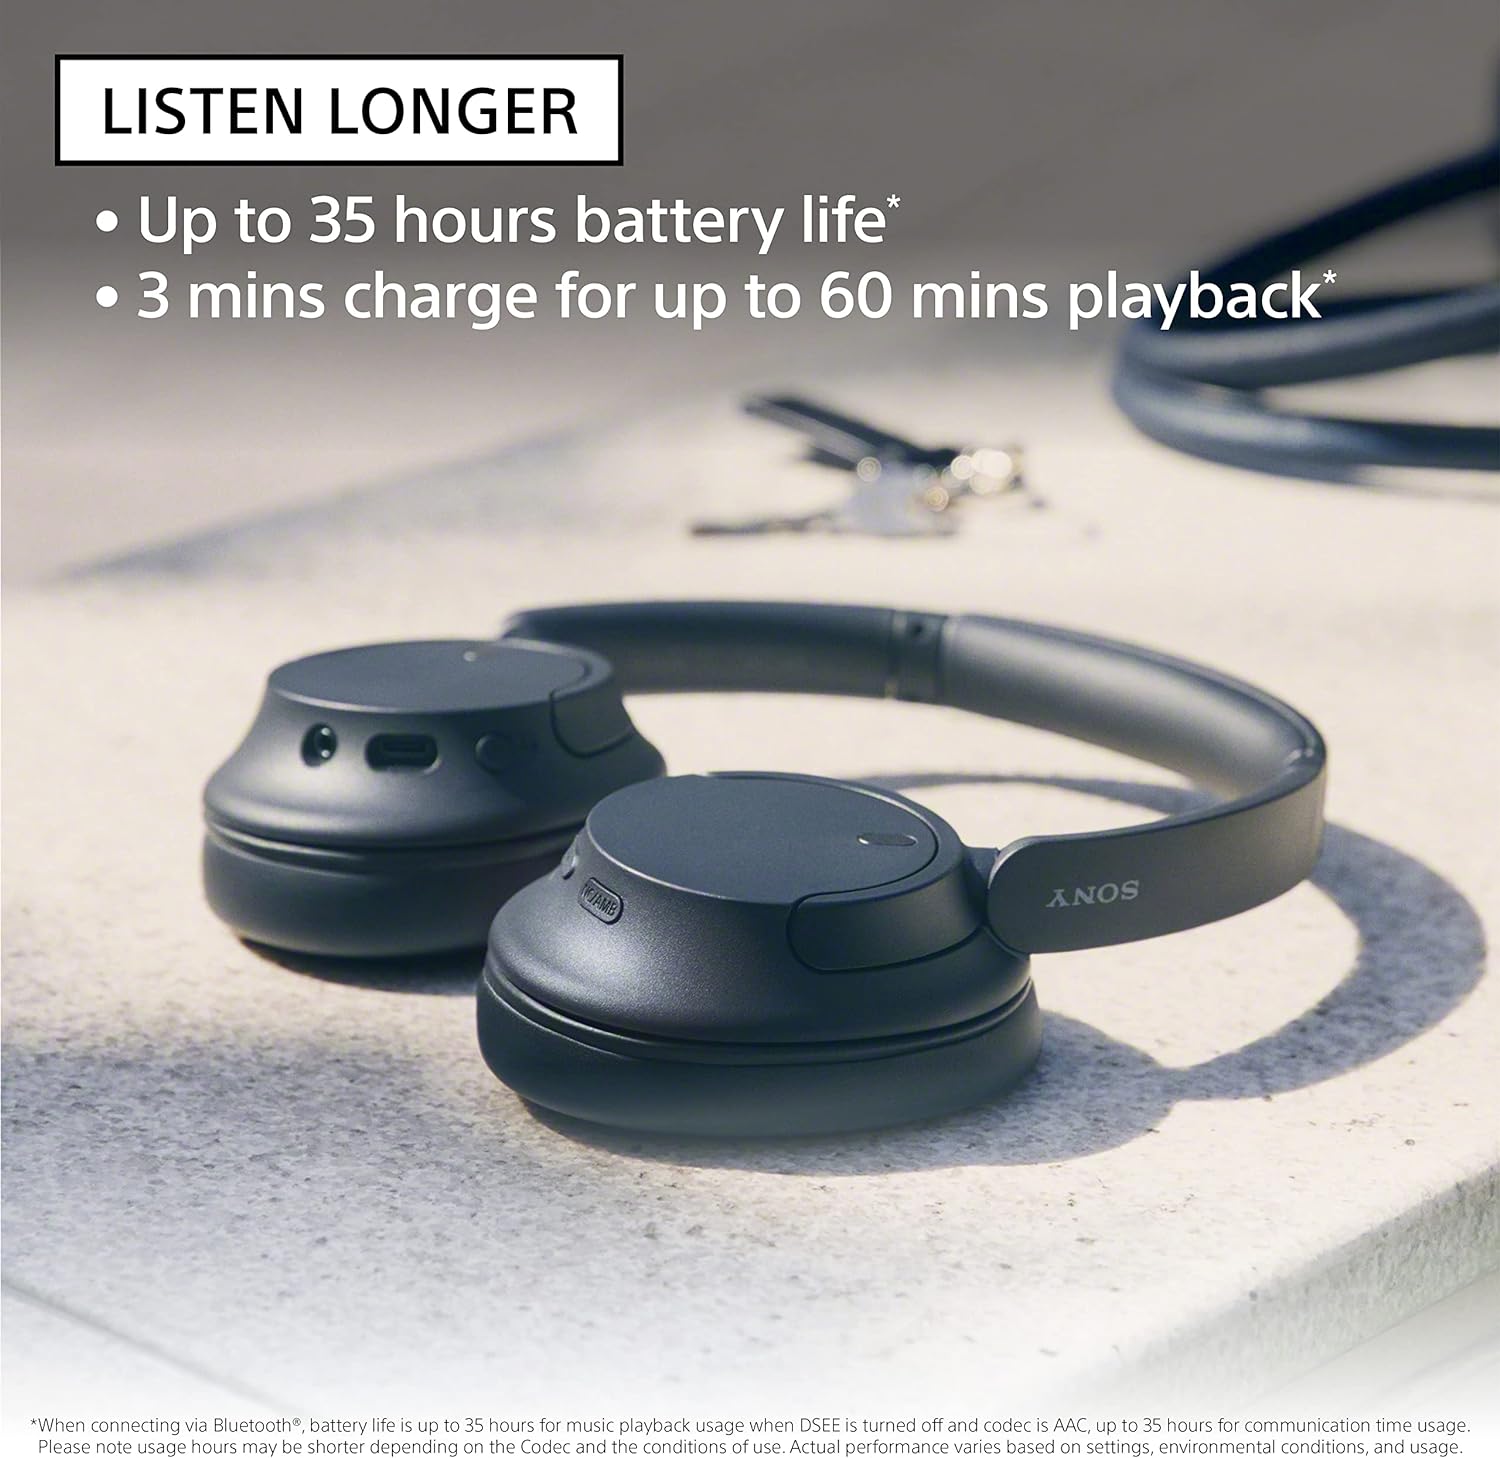 Sony Noise Canceling Wireless Headphones Bluetooth Over The Ear Headset with Microphone